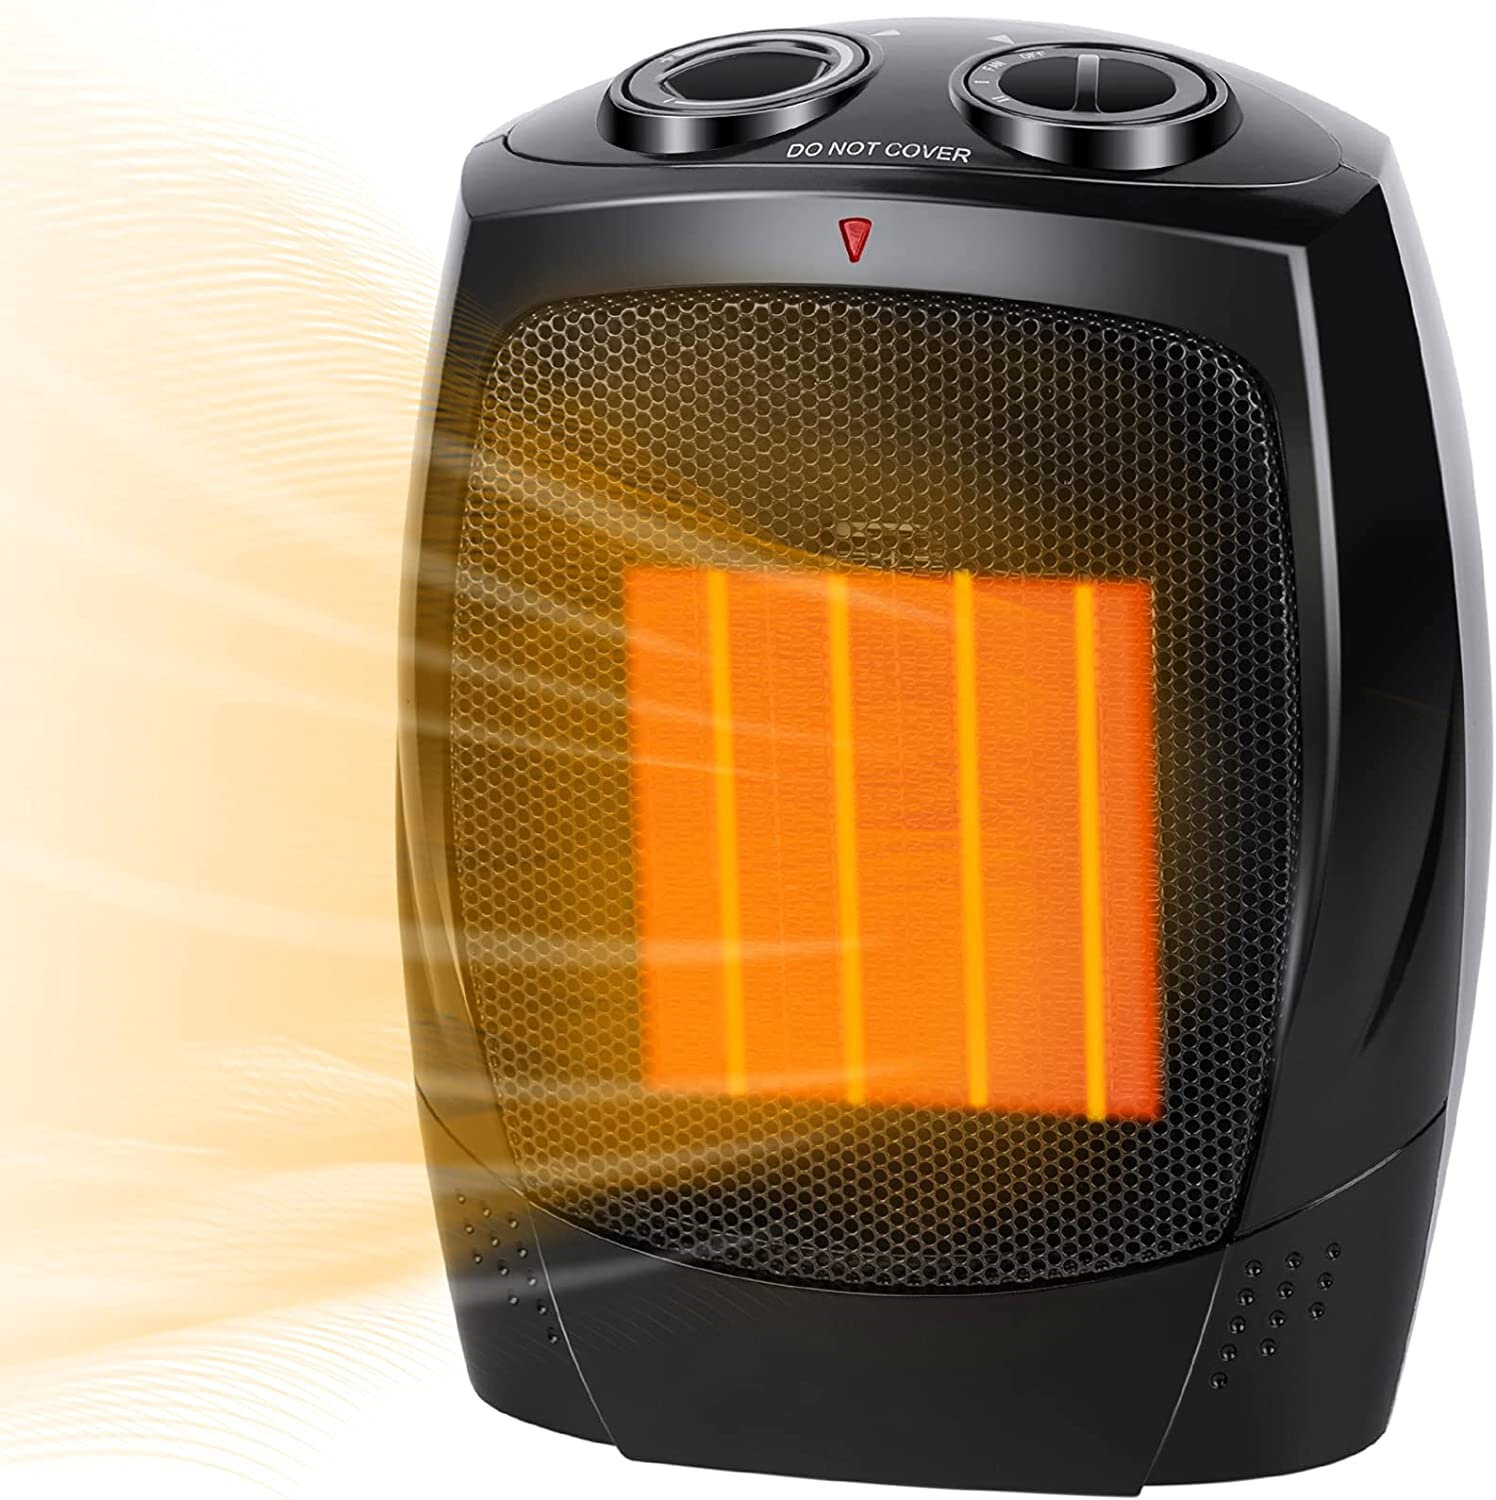 Portable Electric Space Heater 900W Heater Safe & Quiet For Office Room Desk USA